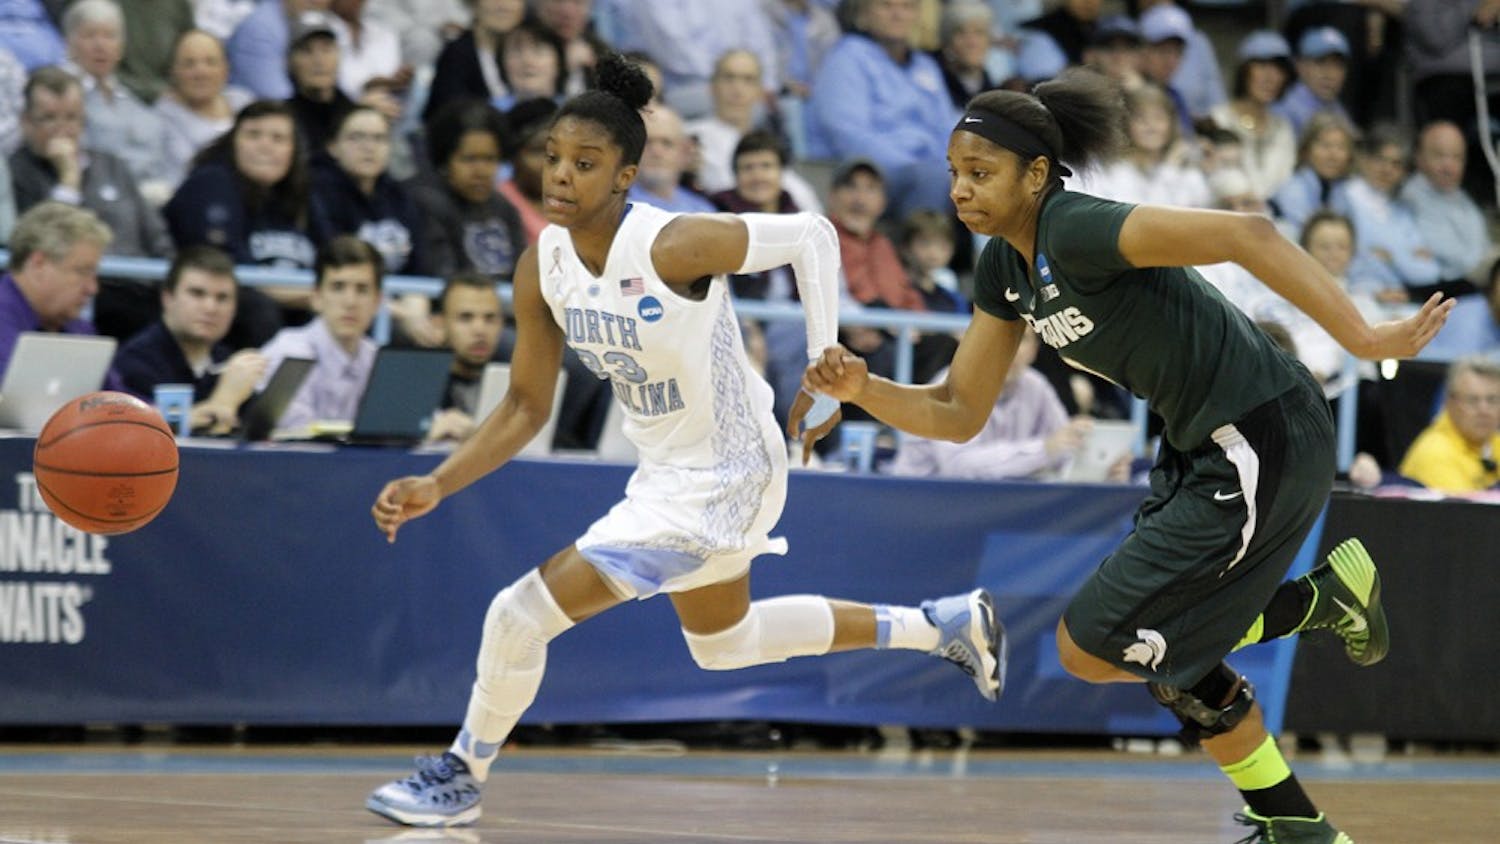 UNC guard Diamond DeShields (23) races for a loose ball against a Michigan State player. Carolina defeated Michigan State 62-53 on Tuesday in the NCAA Women's Basketball Tournament. 